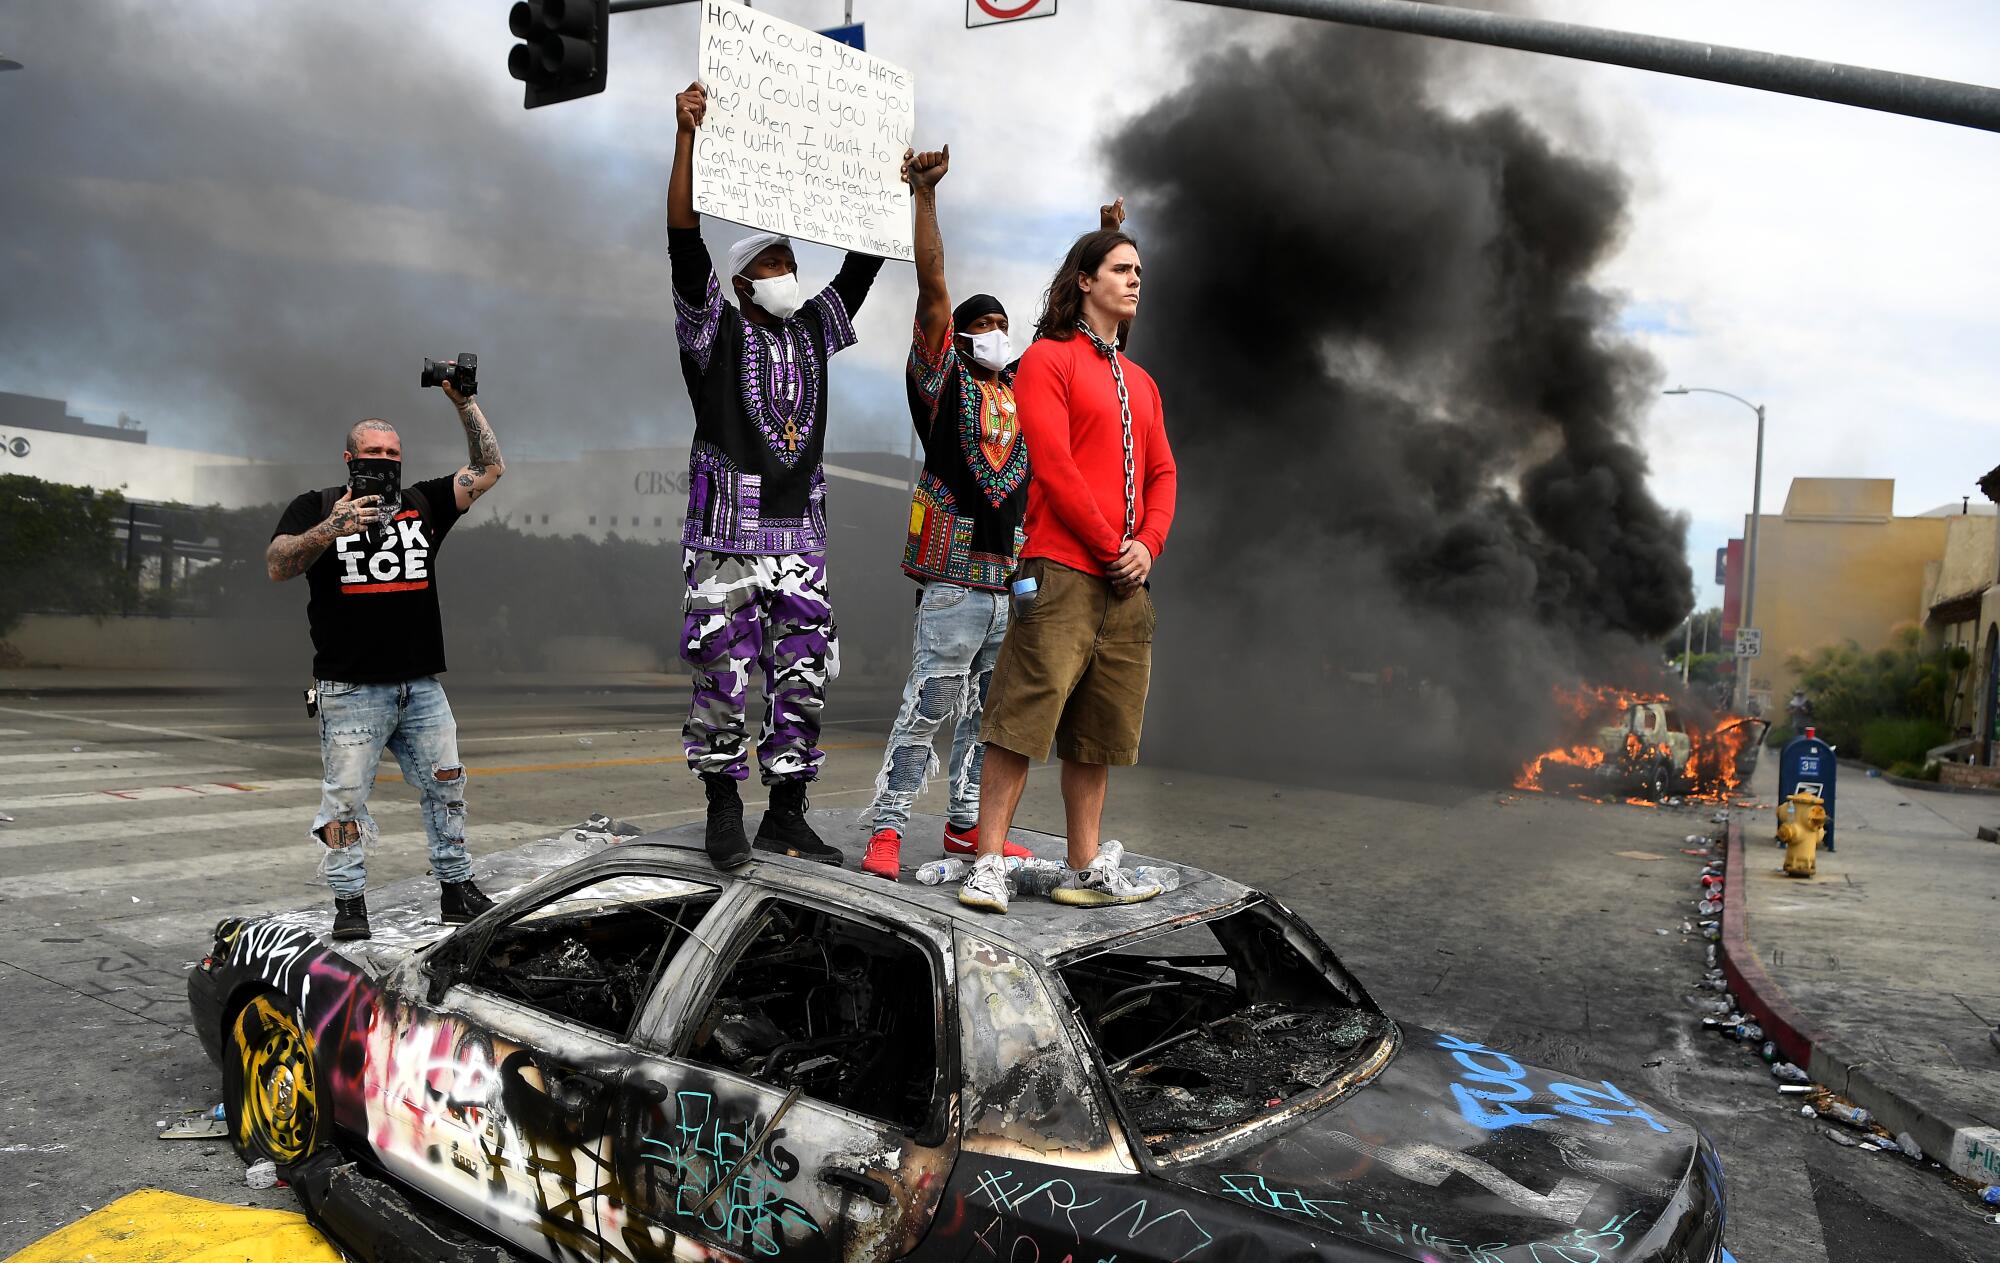 Protesters stand on top of a burned LAPD cruiser in Los Angeles on May 30.